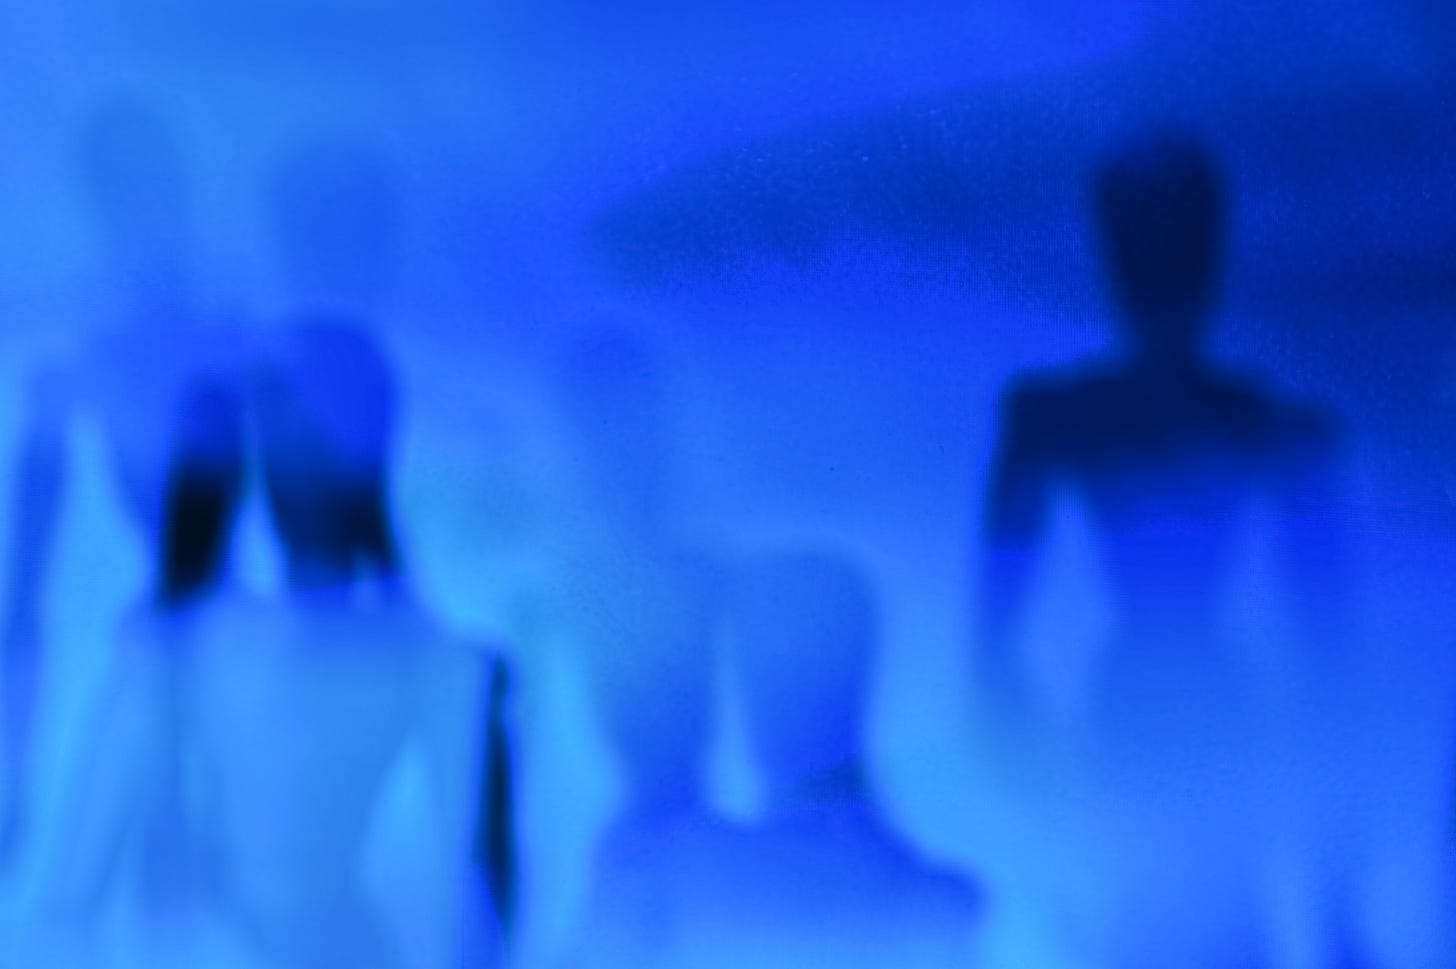 Humanoid shadows in a blue space